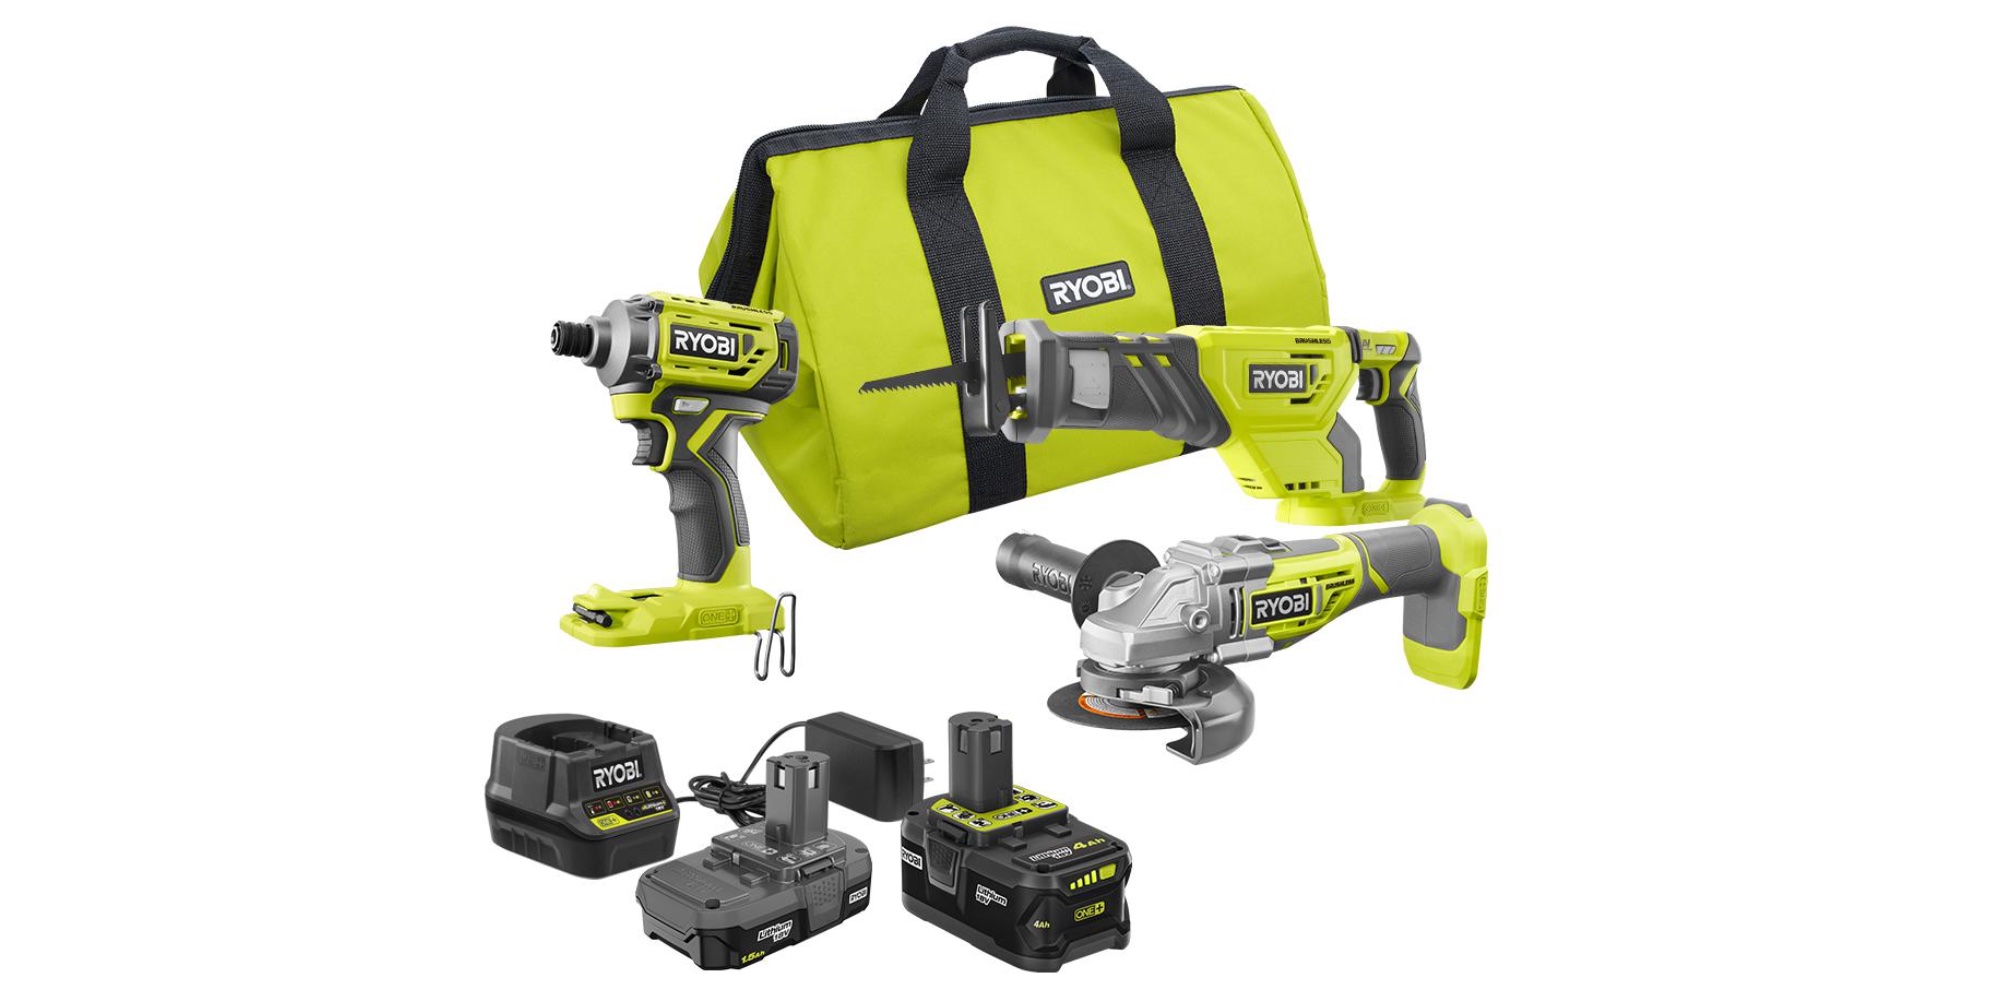 Home Depot Launches Up To 45 Off Tool Sale With Ryobi Bundles And More 9to5toys